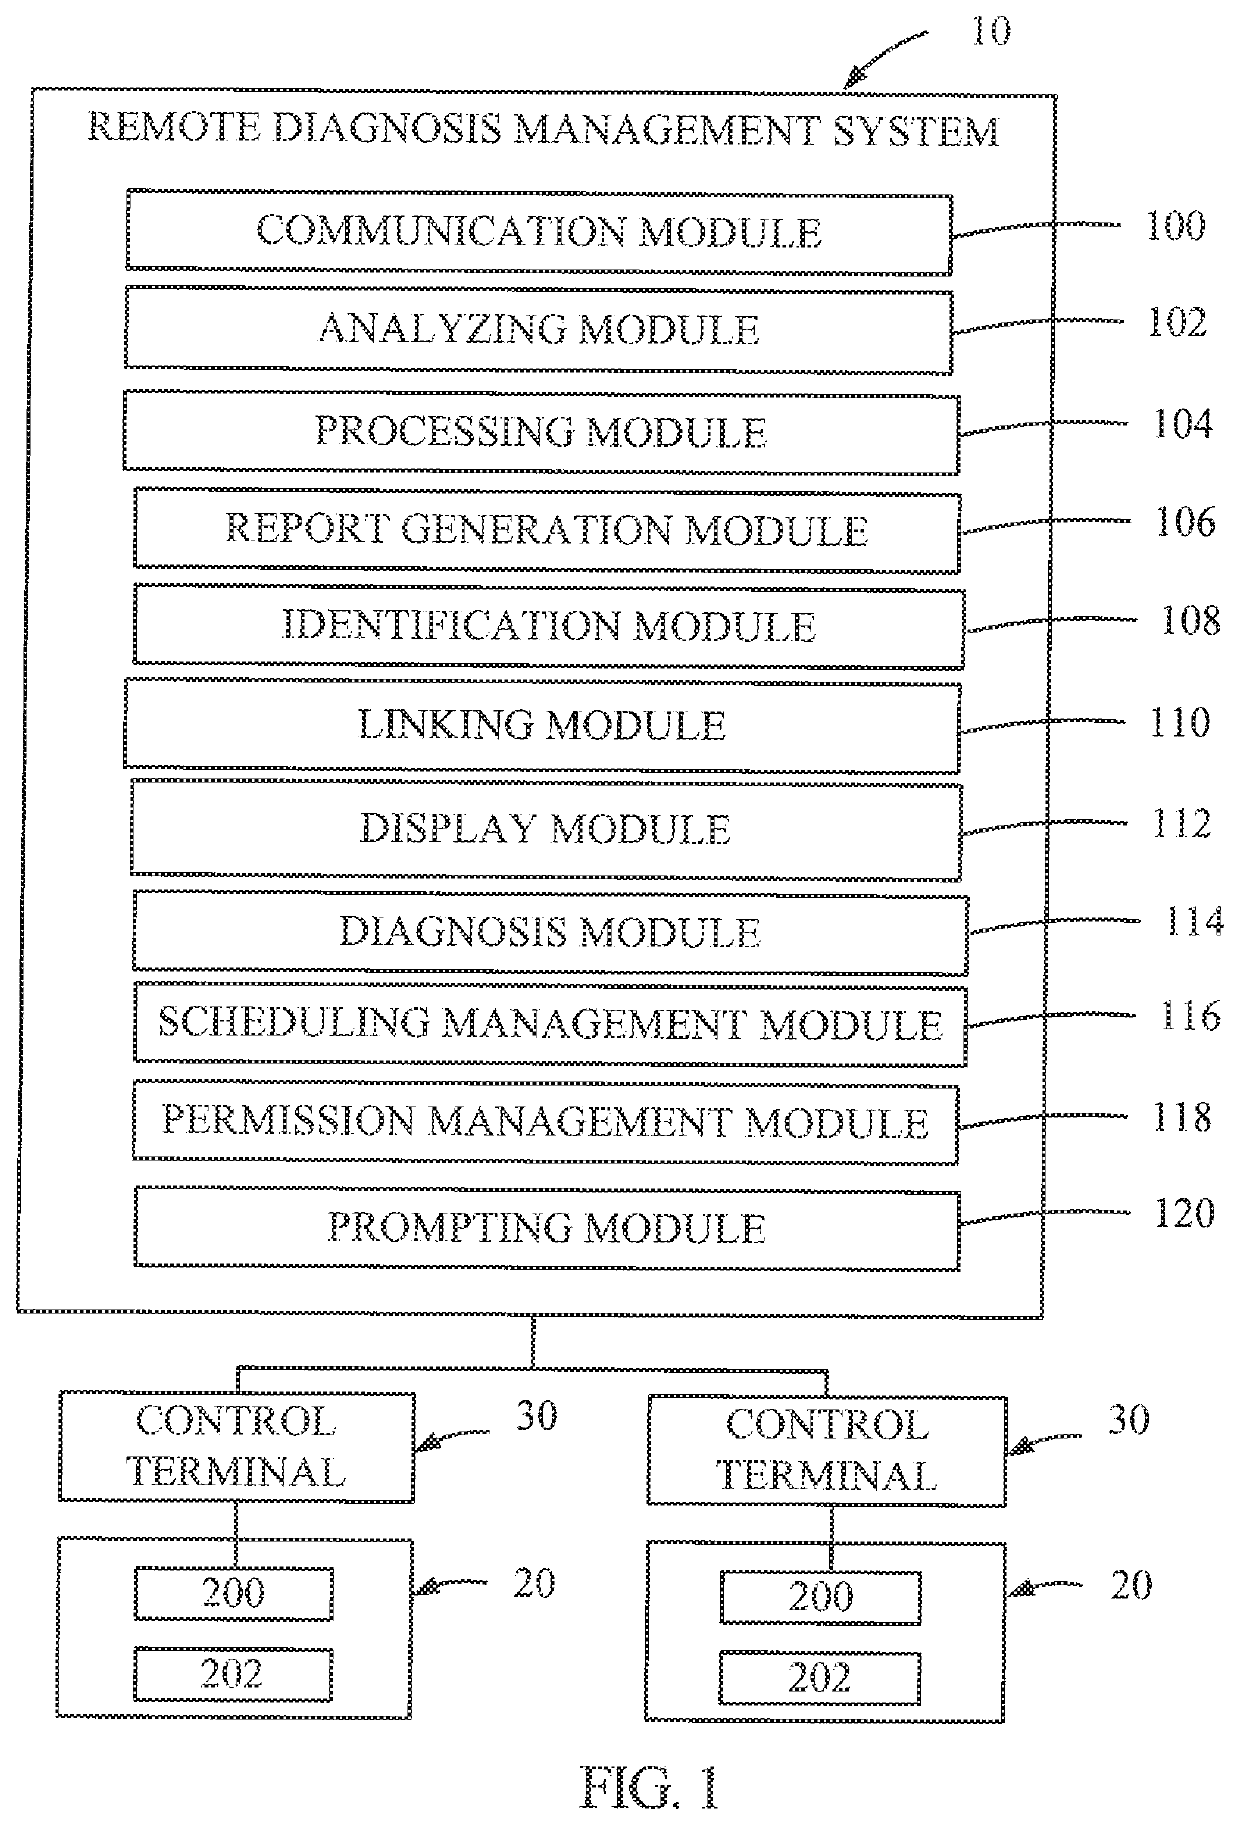 Remote diagnosis management system and method for operating the same